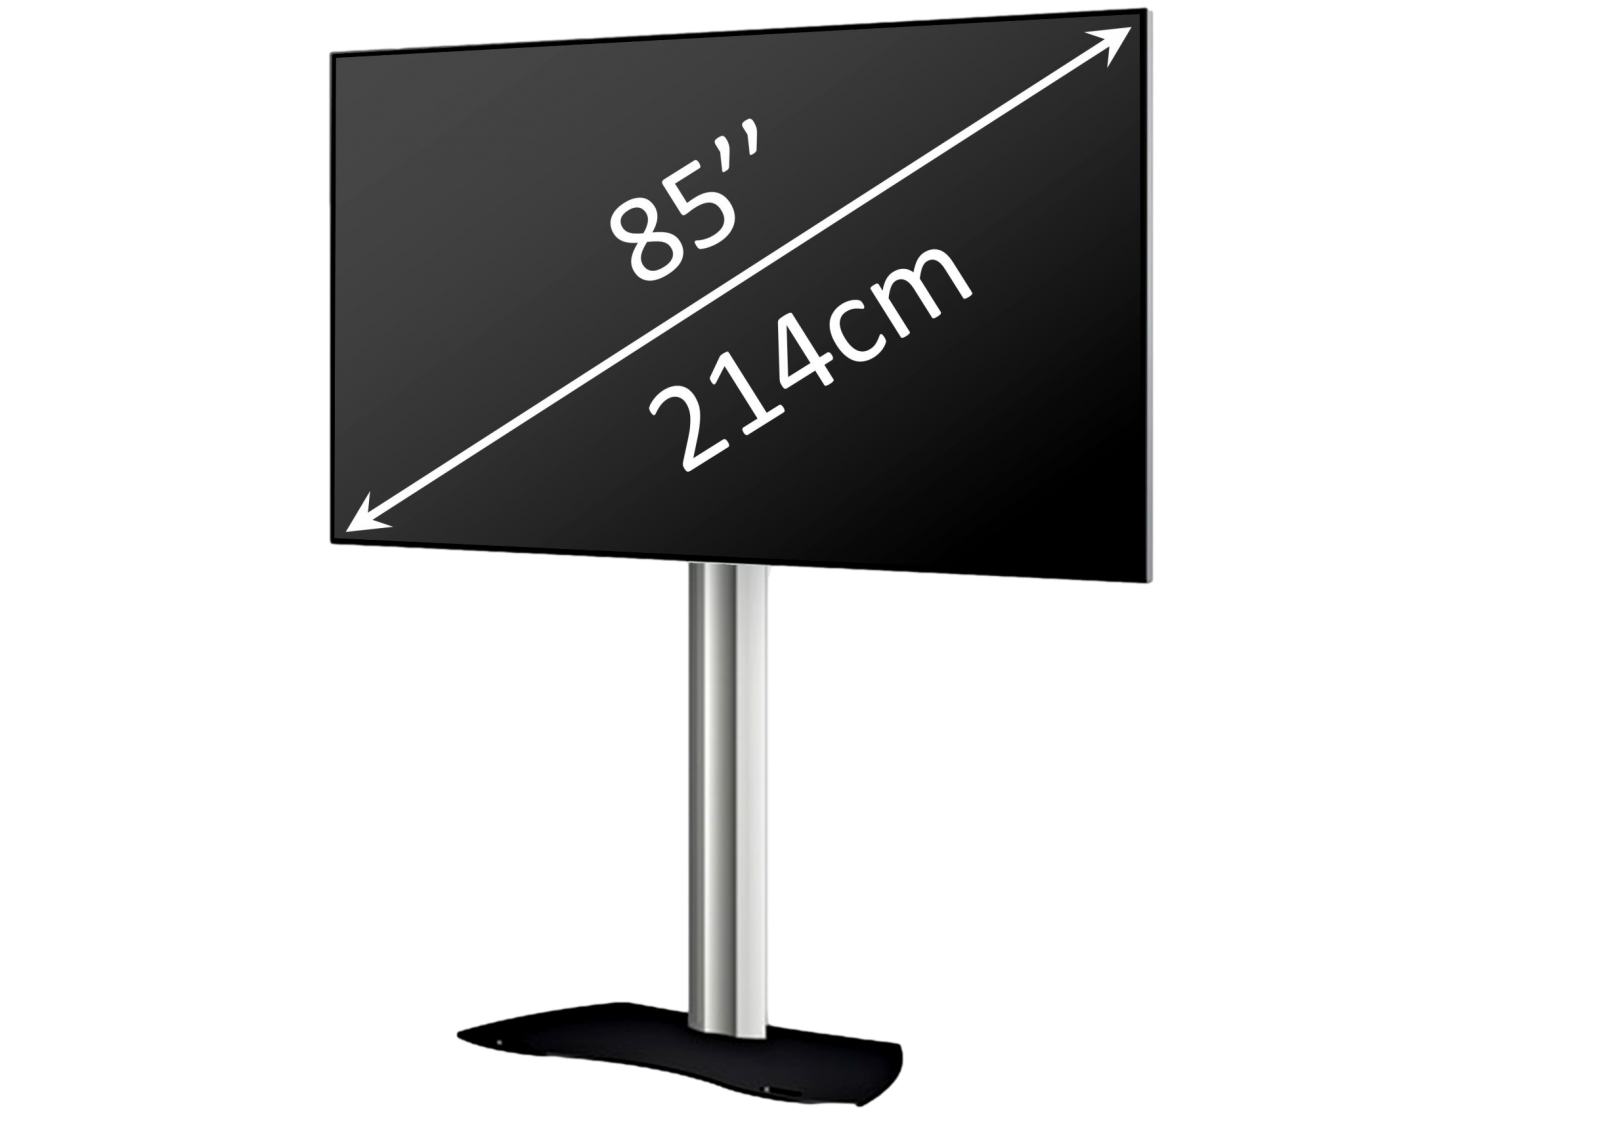 Rental of very large flat screens with professional self-supporting stand.